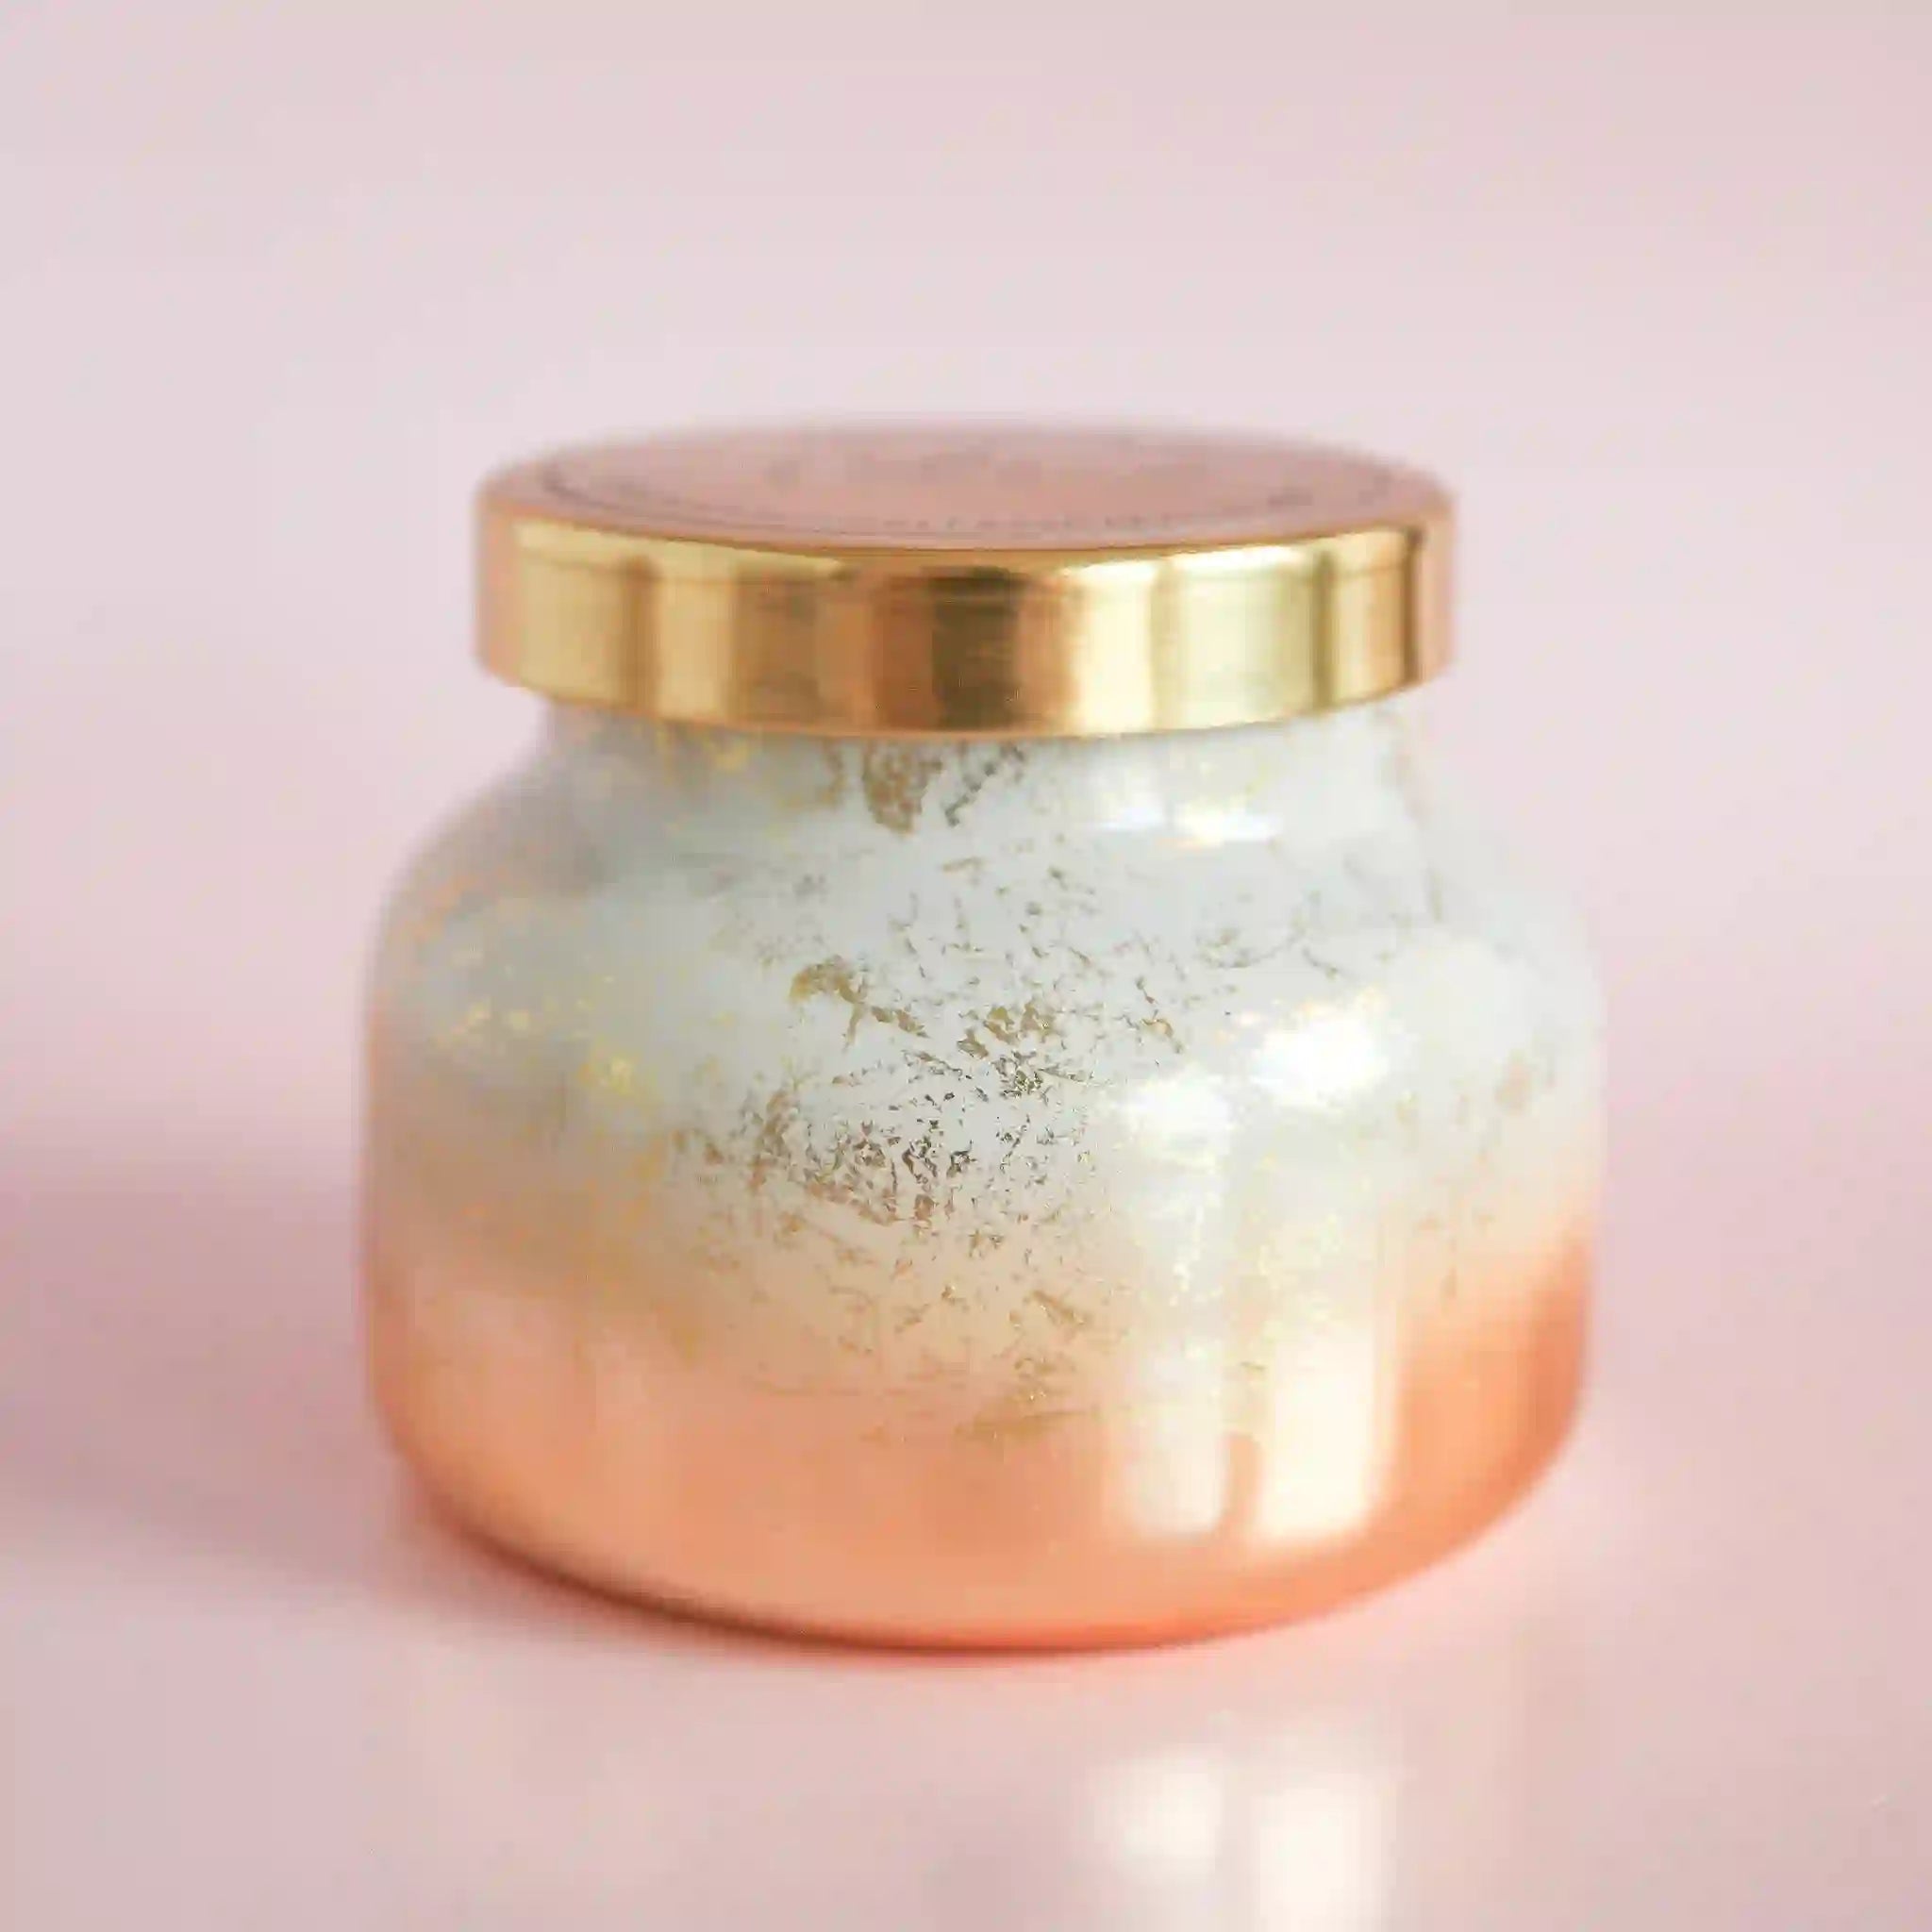 On a pink background is a white and gold glass jarred candle with a gold lid that reads, "capriBLUE Volcano"